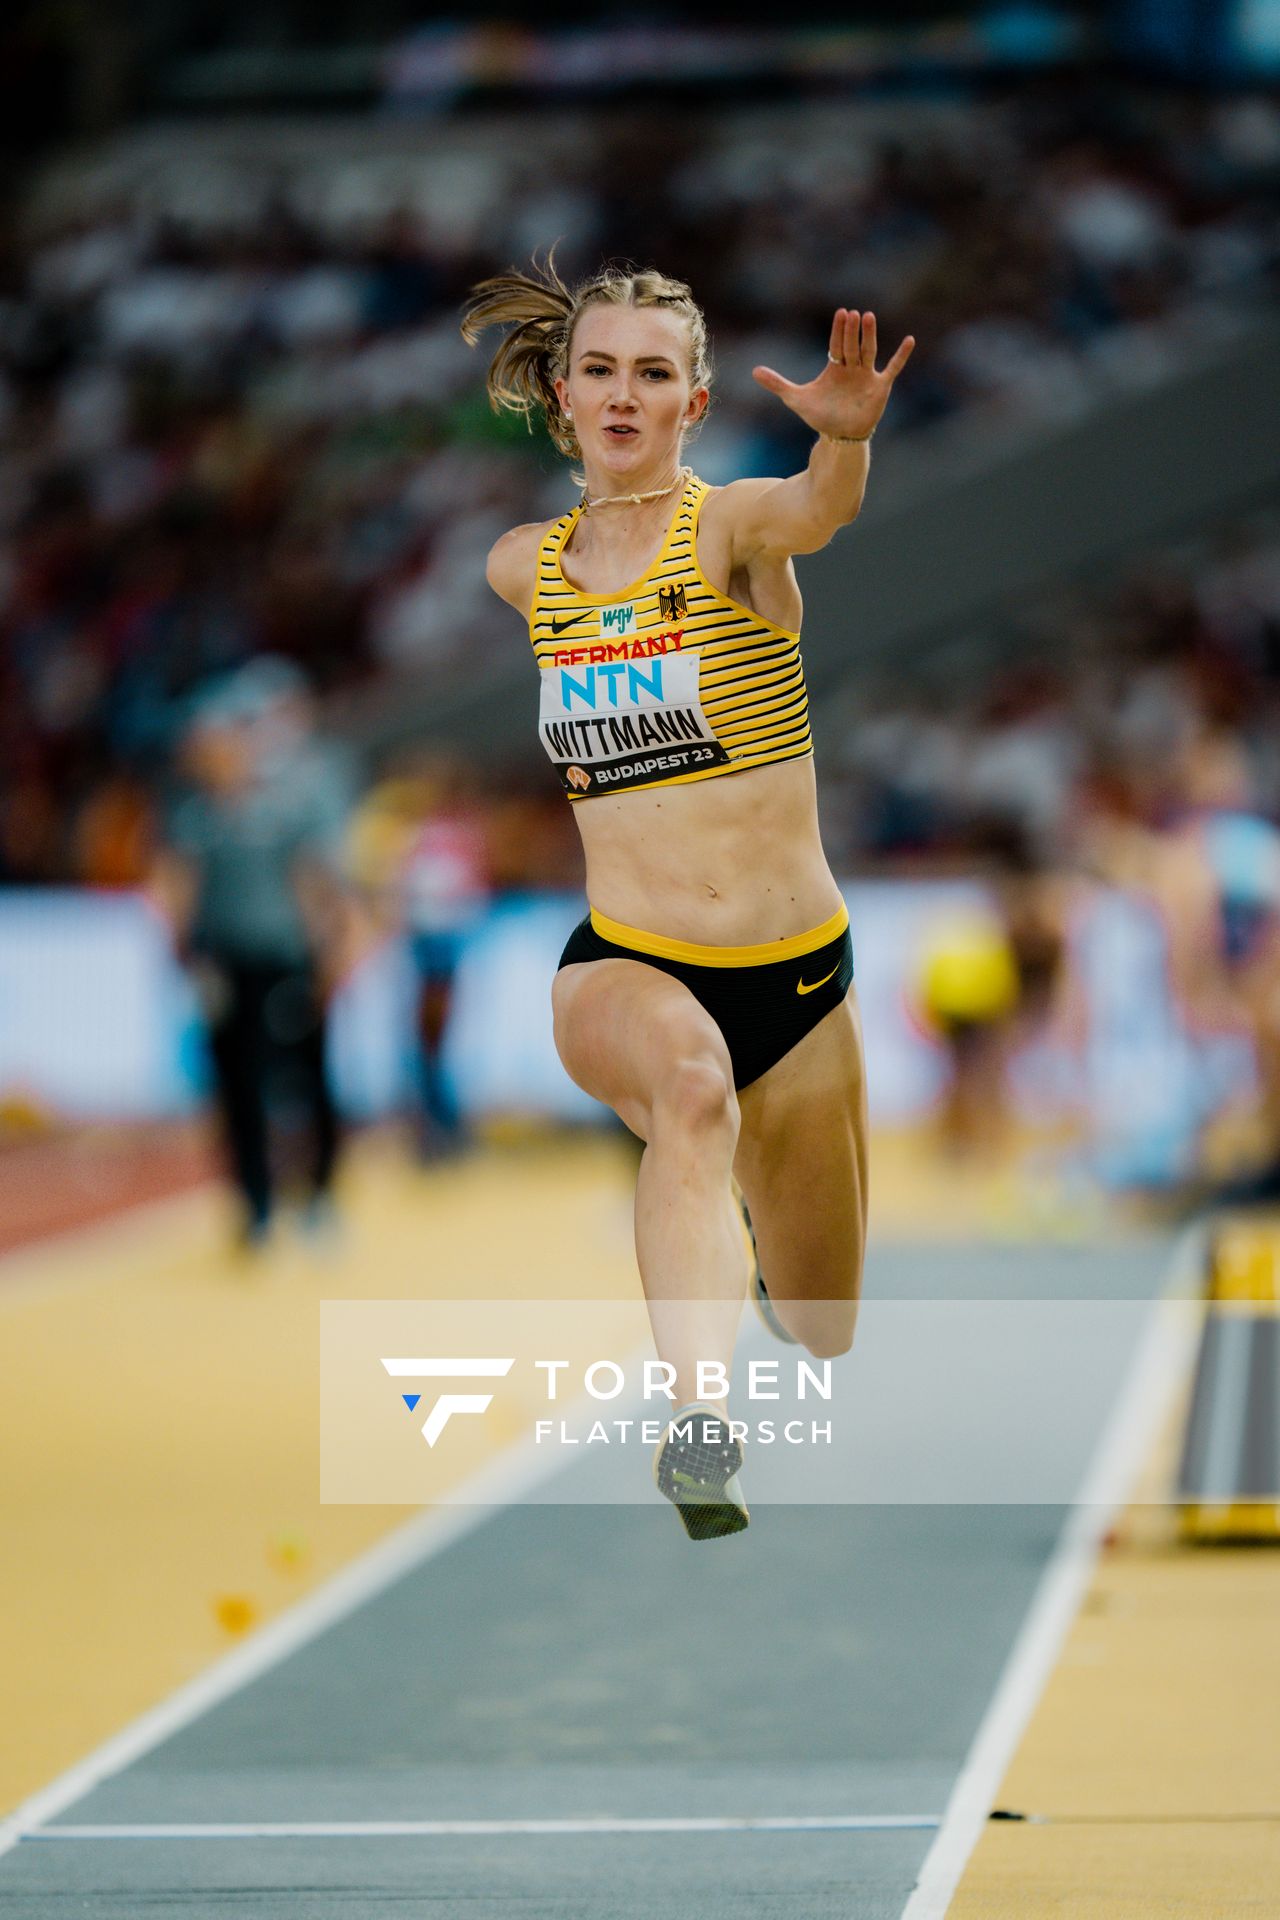 Kira Wittmann (GER/Germany) during the Triple Jump on Day 5 of the World Athletics Championships Budapest 23 at the National Athletics Centre in Budapest, Hungary on August 23, 2023.